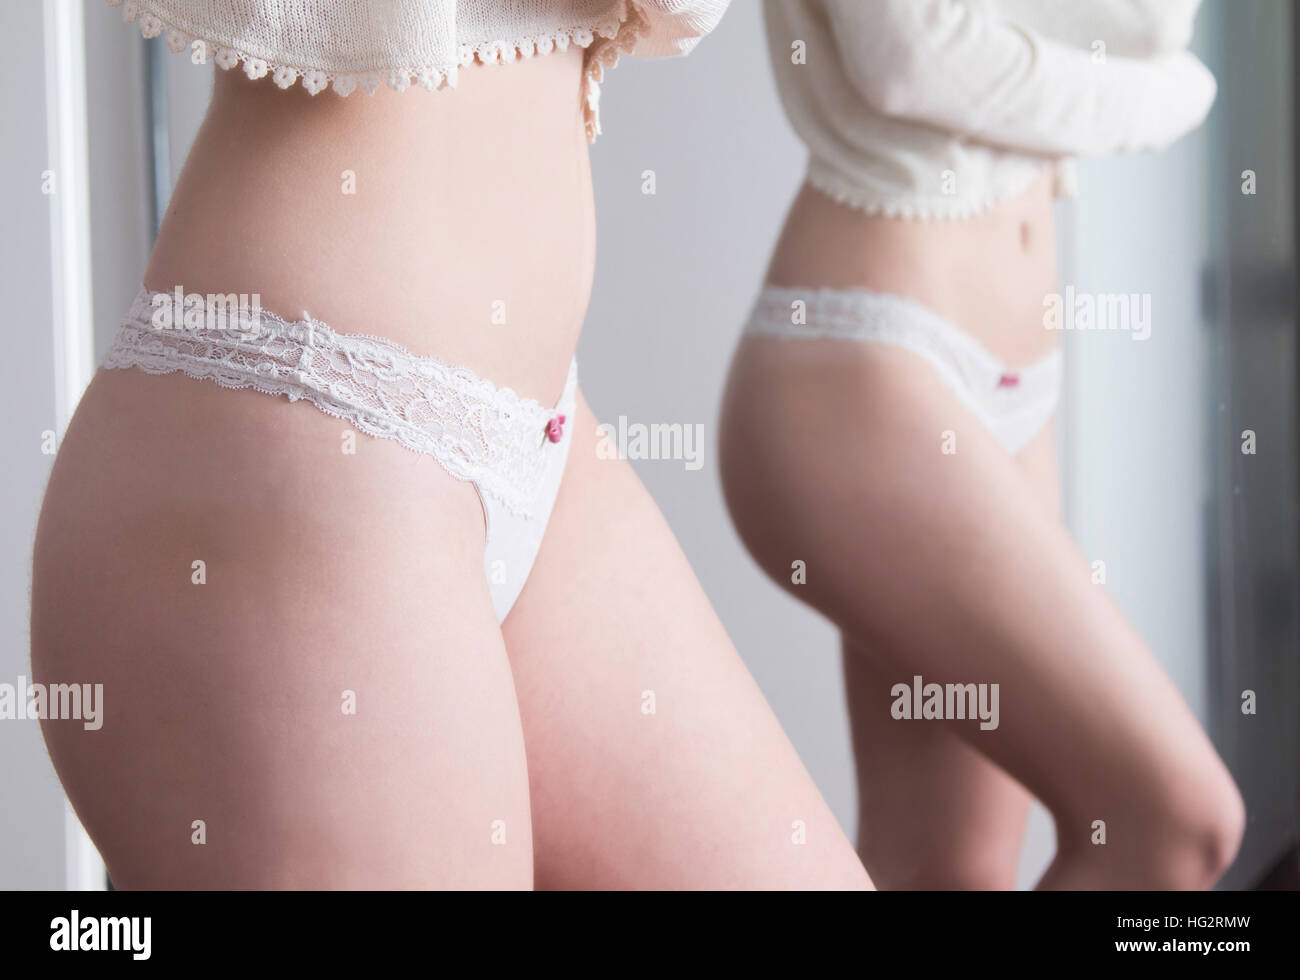 Sexy girl in white panties standing next to mirror, body detail